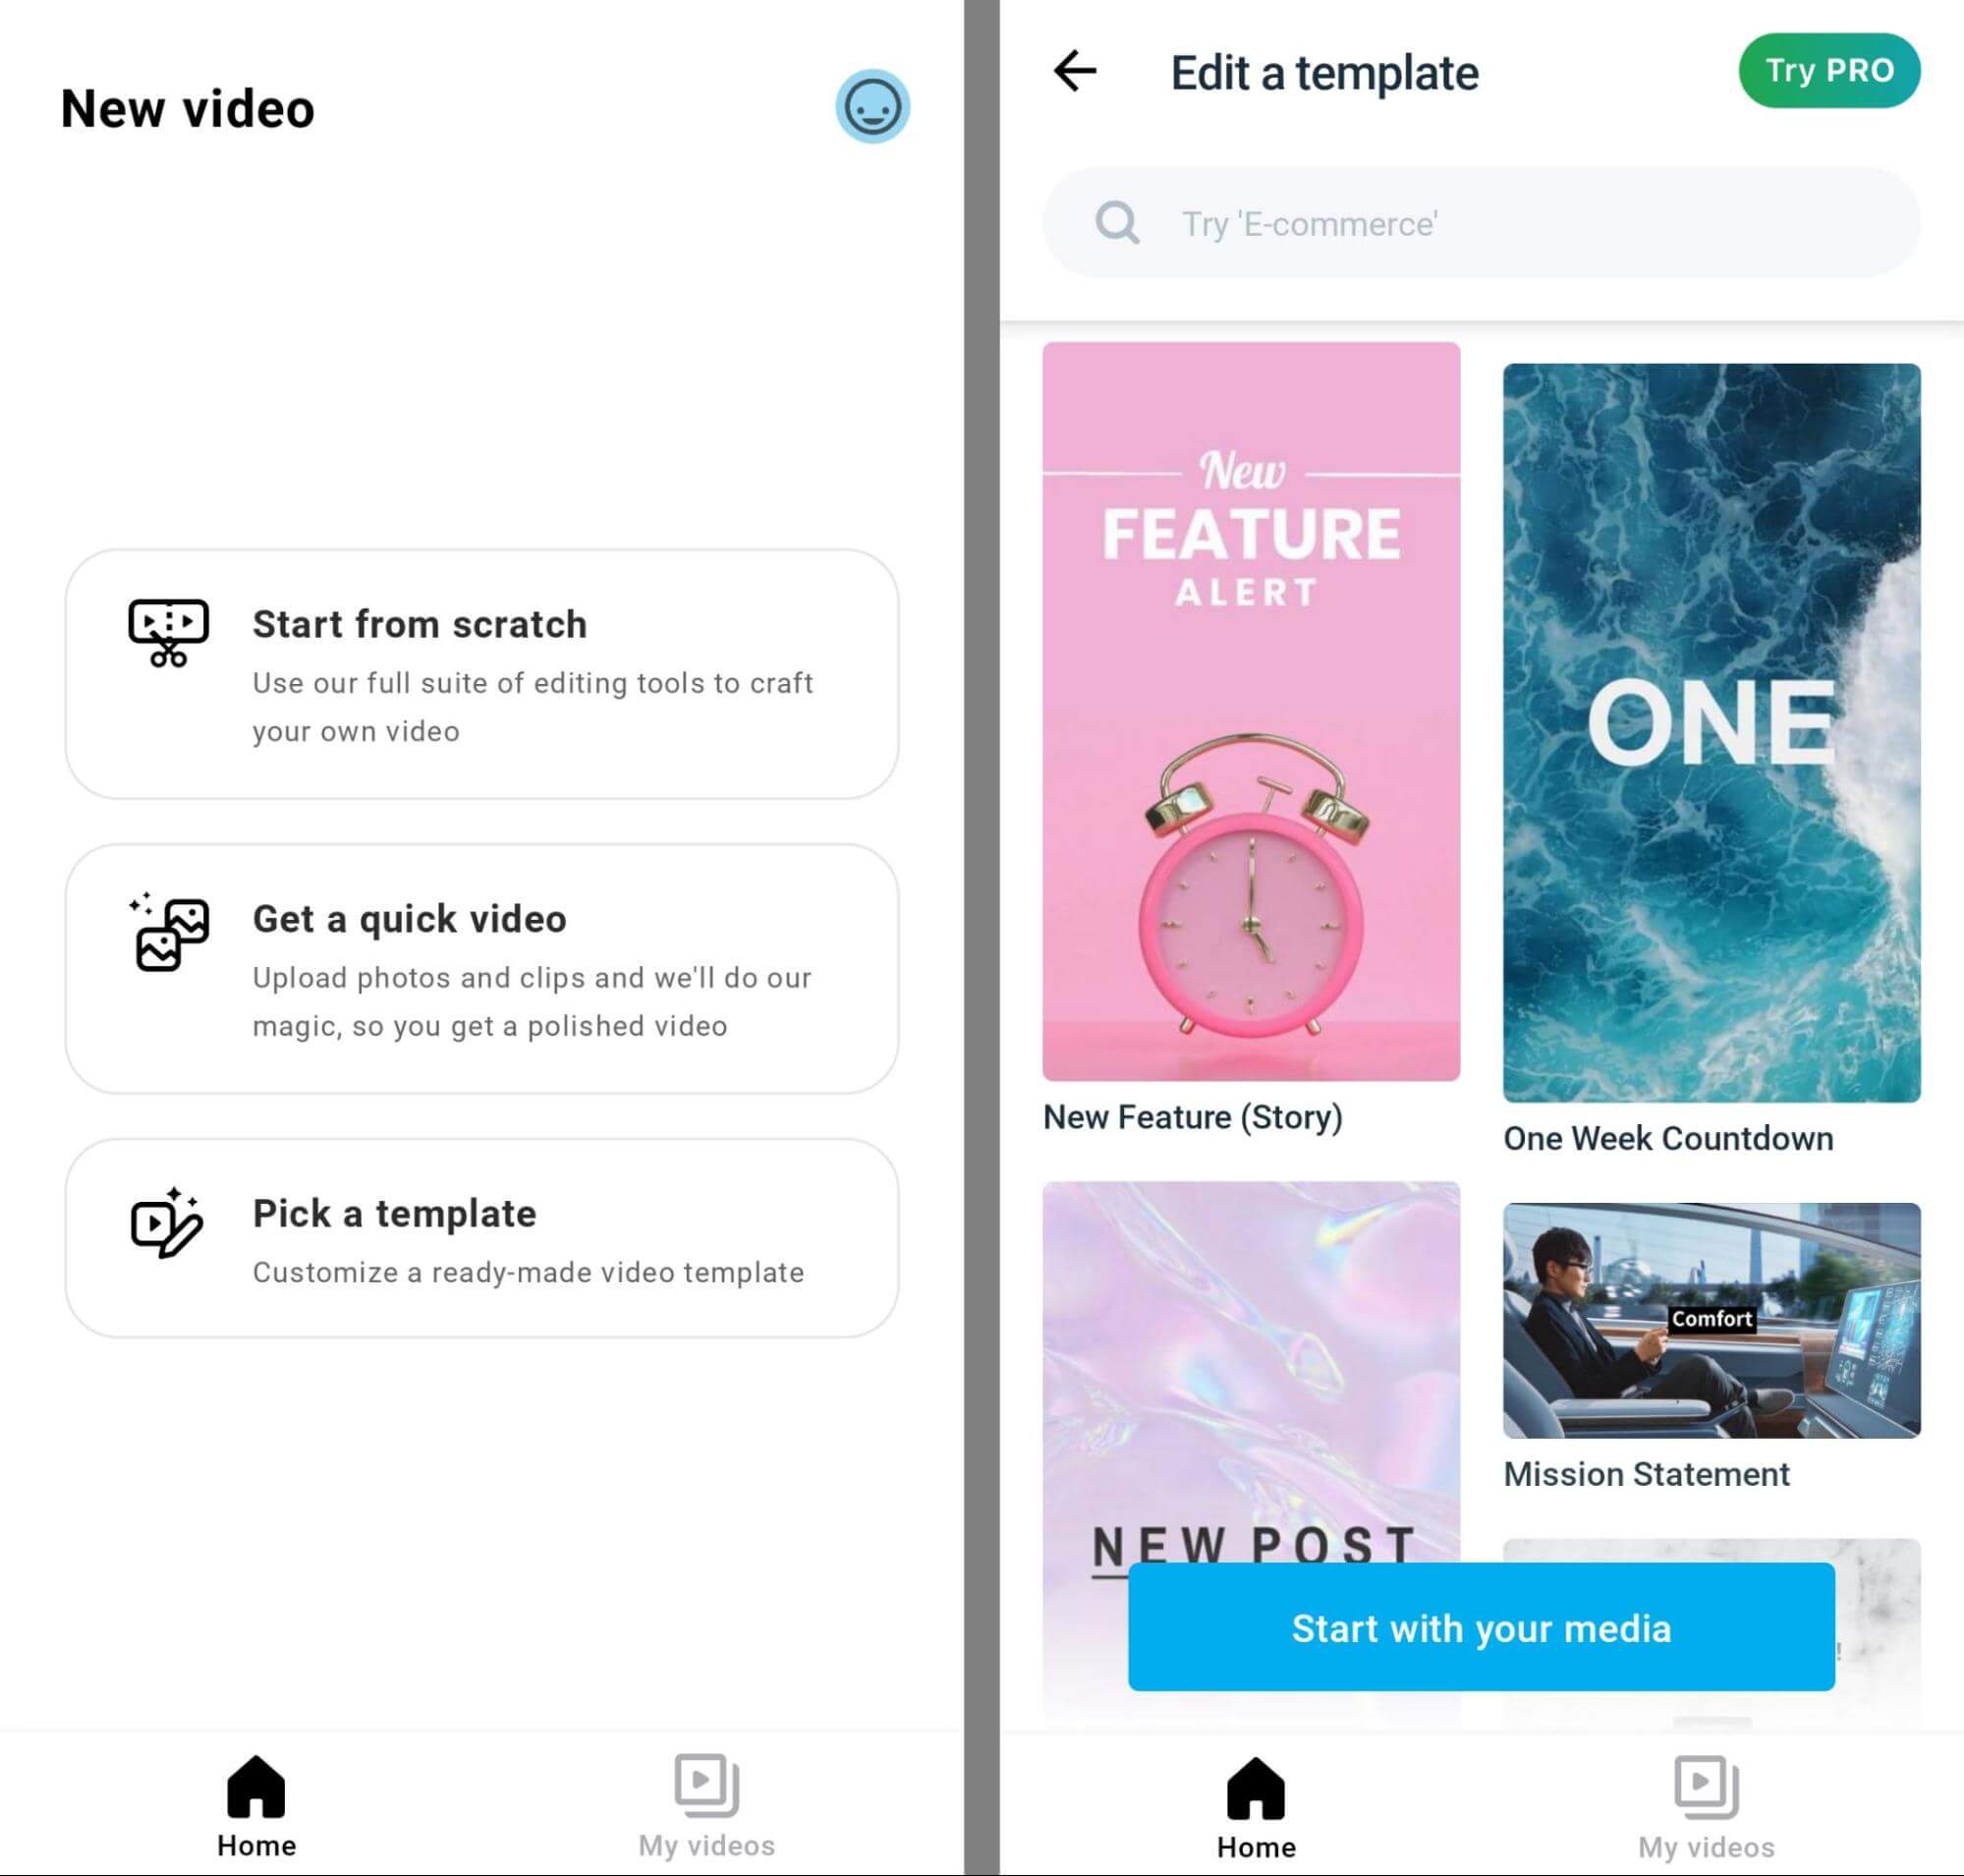 video-editing-apps-short-form-content-mobile-app-vimeo-create-ai-workflow-new-video-edit-template-start-with-your-media-20